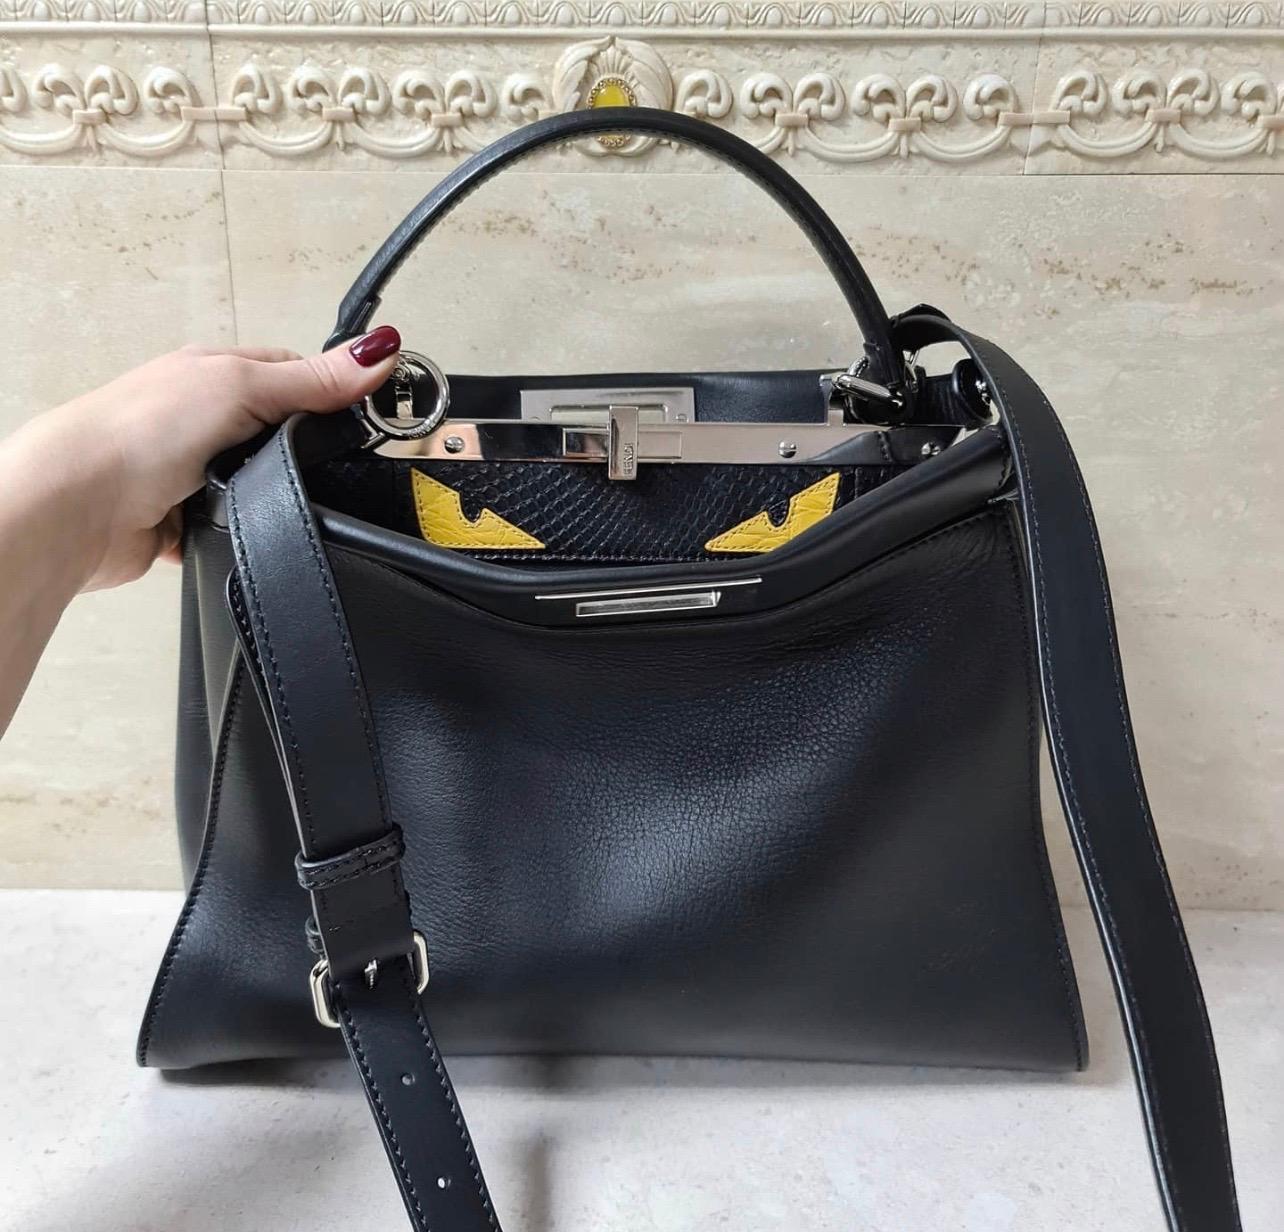 This Fendi Monster Peekaboo Bag Calfskin and Python Medium, crafted from black calfskin leather, features short leather top handle, protective base studs, framed top, and silver-tone hardware. 
Its double-sided turn-lock closures open to a genuine